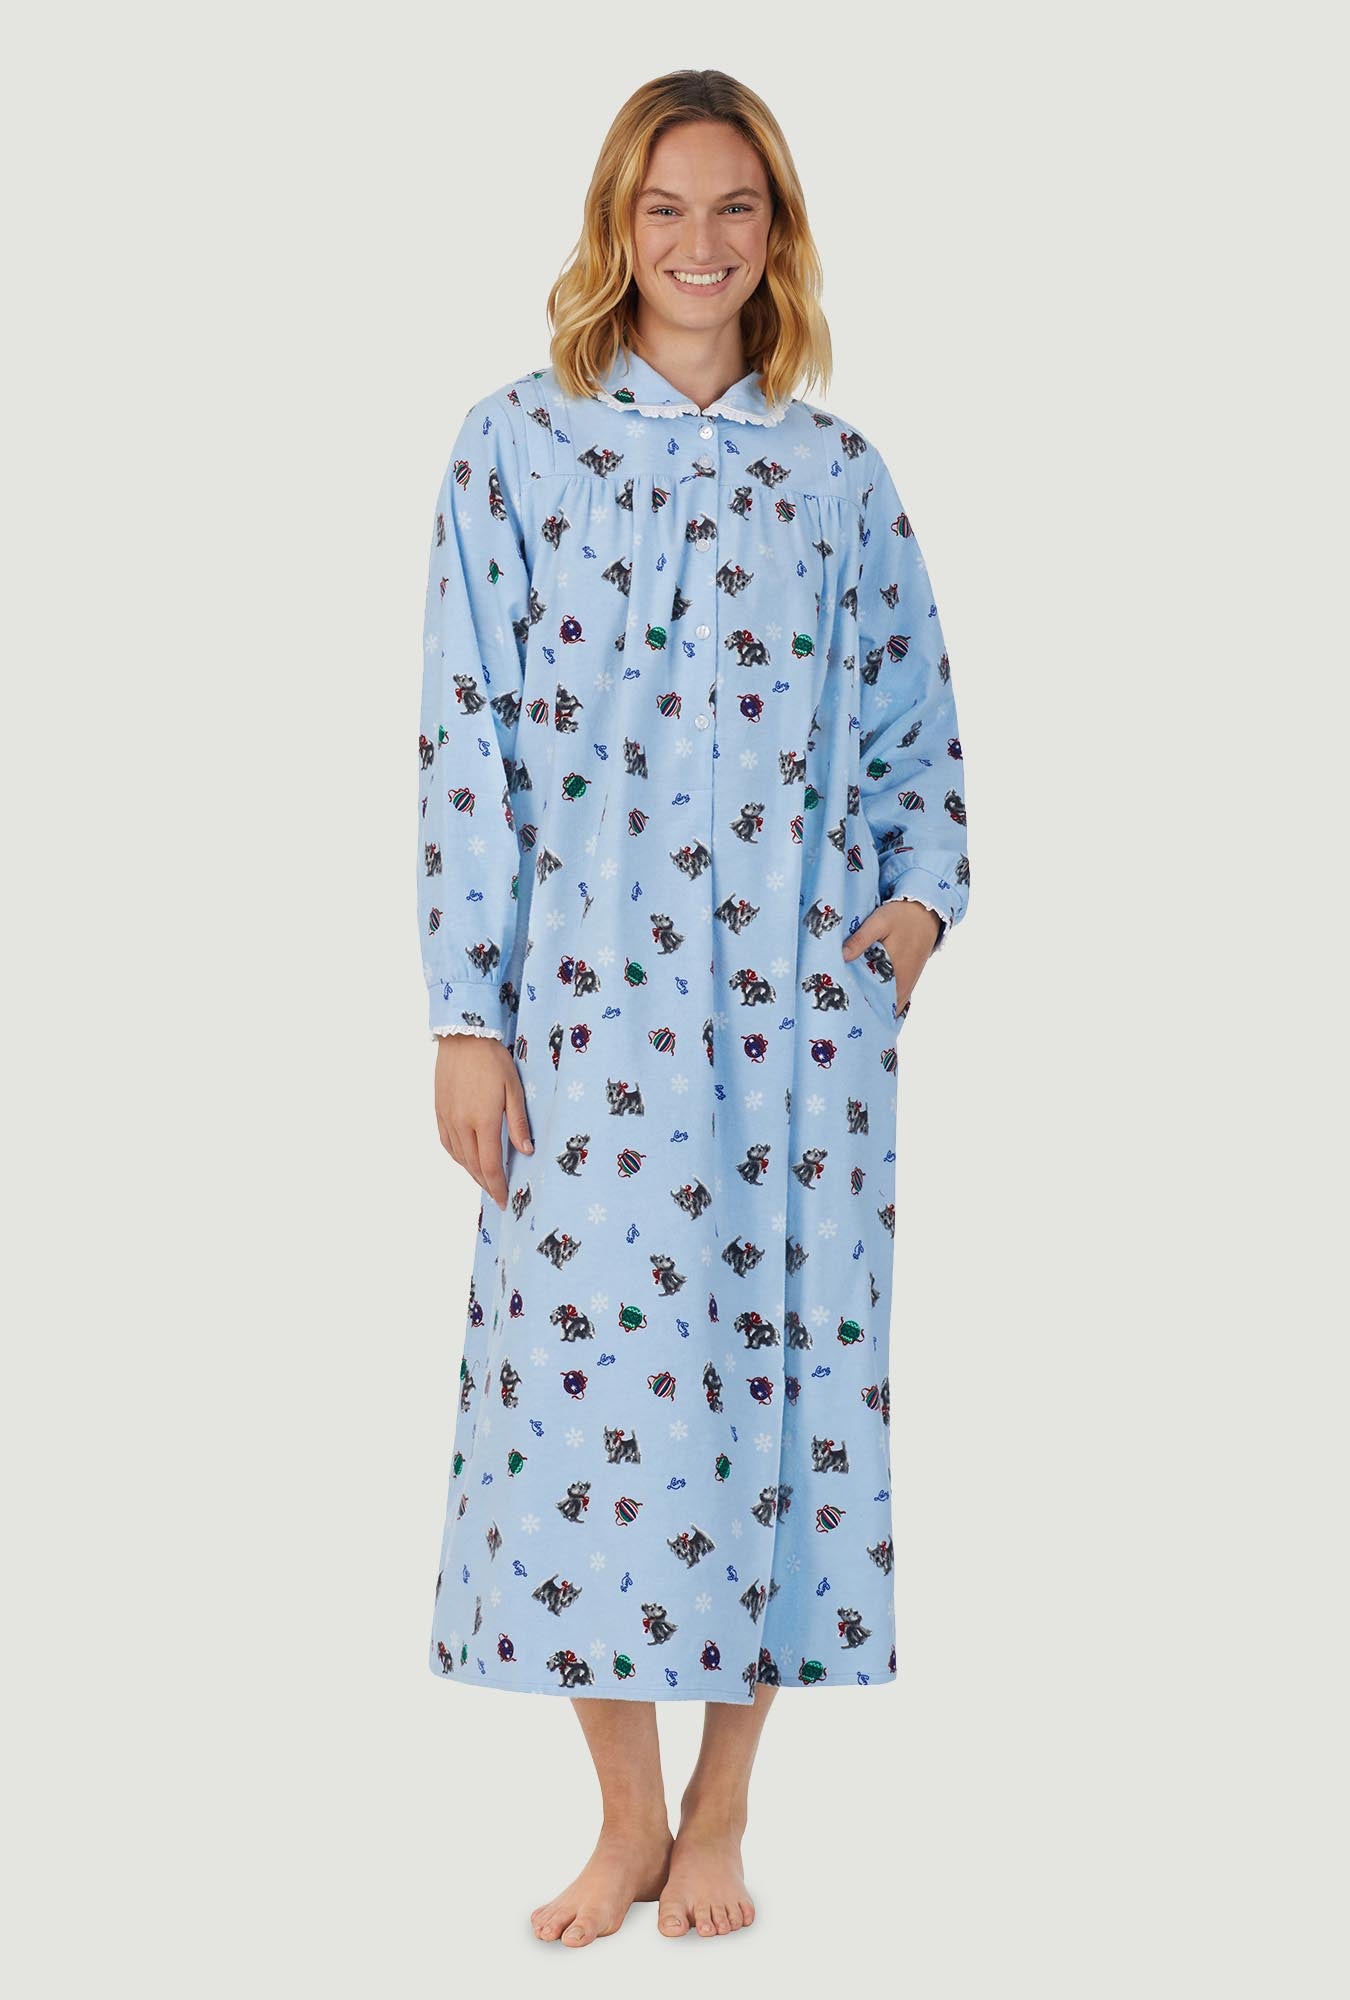 A lady wearing blue peter pan flannel gown with scottie dogs on parade print.